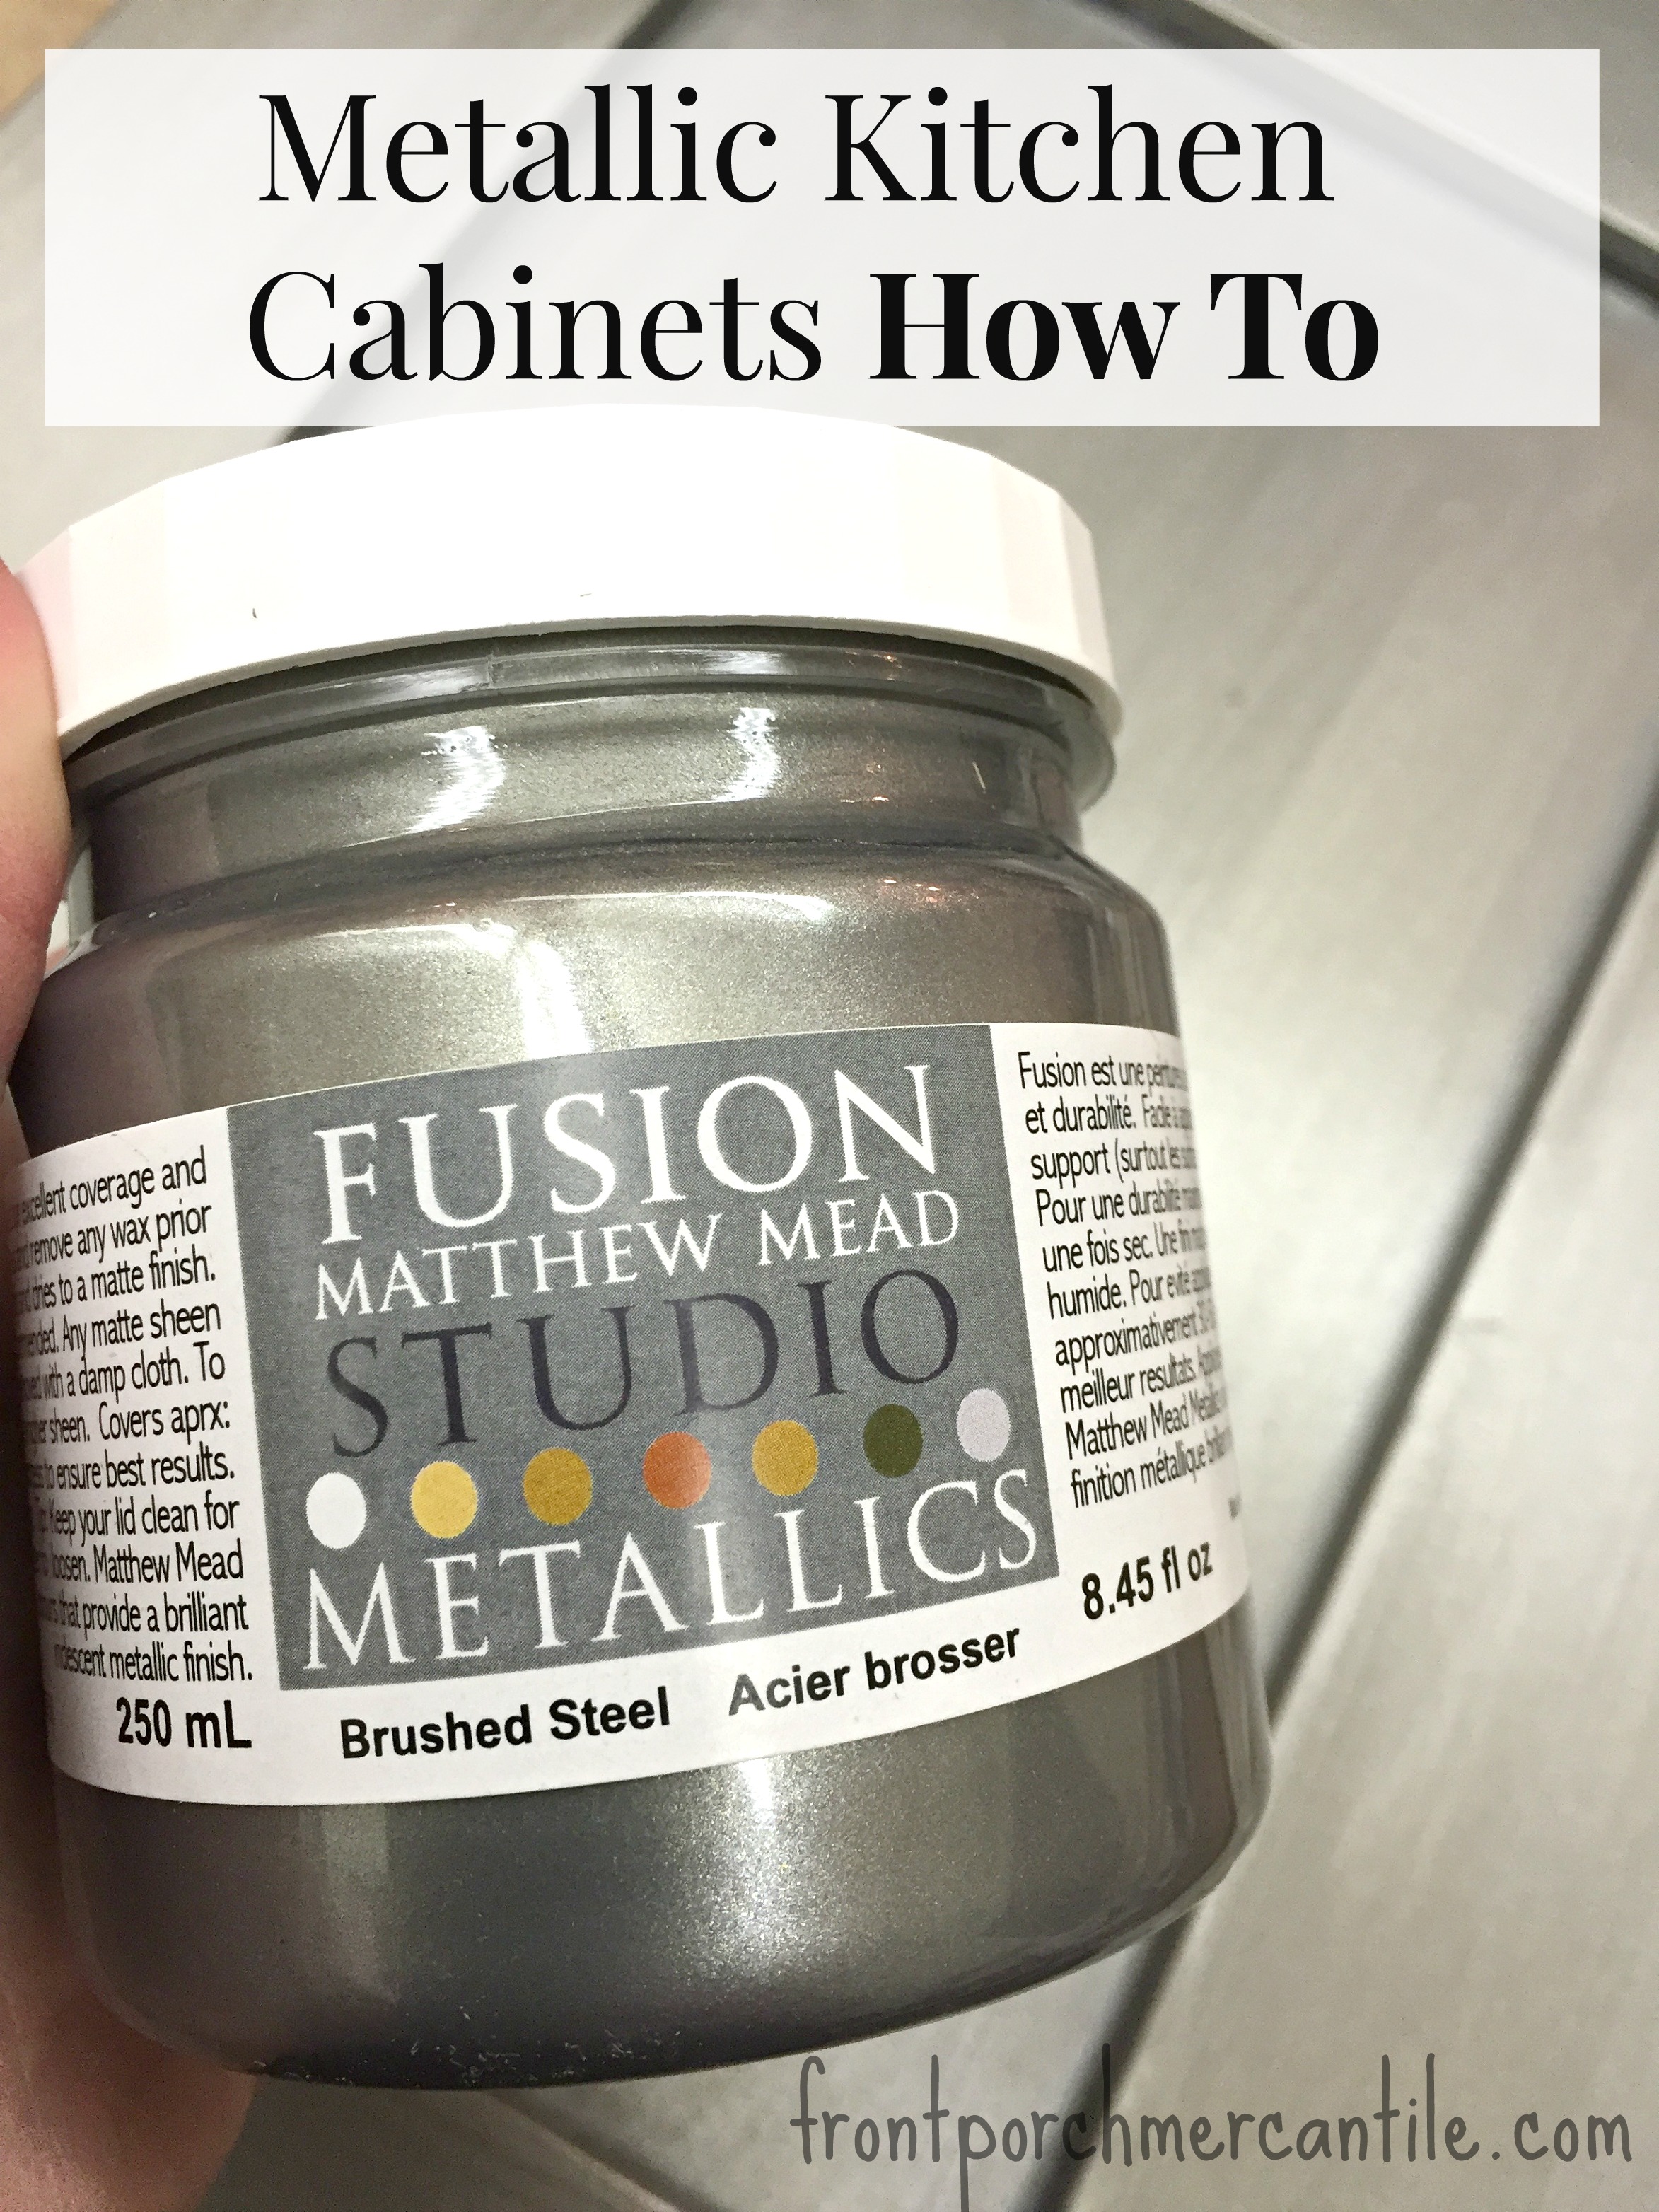 Metallic Kitchen Cabinet how to Front Porch Mercantile